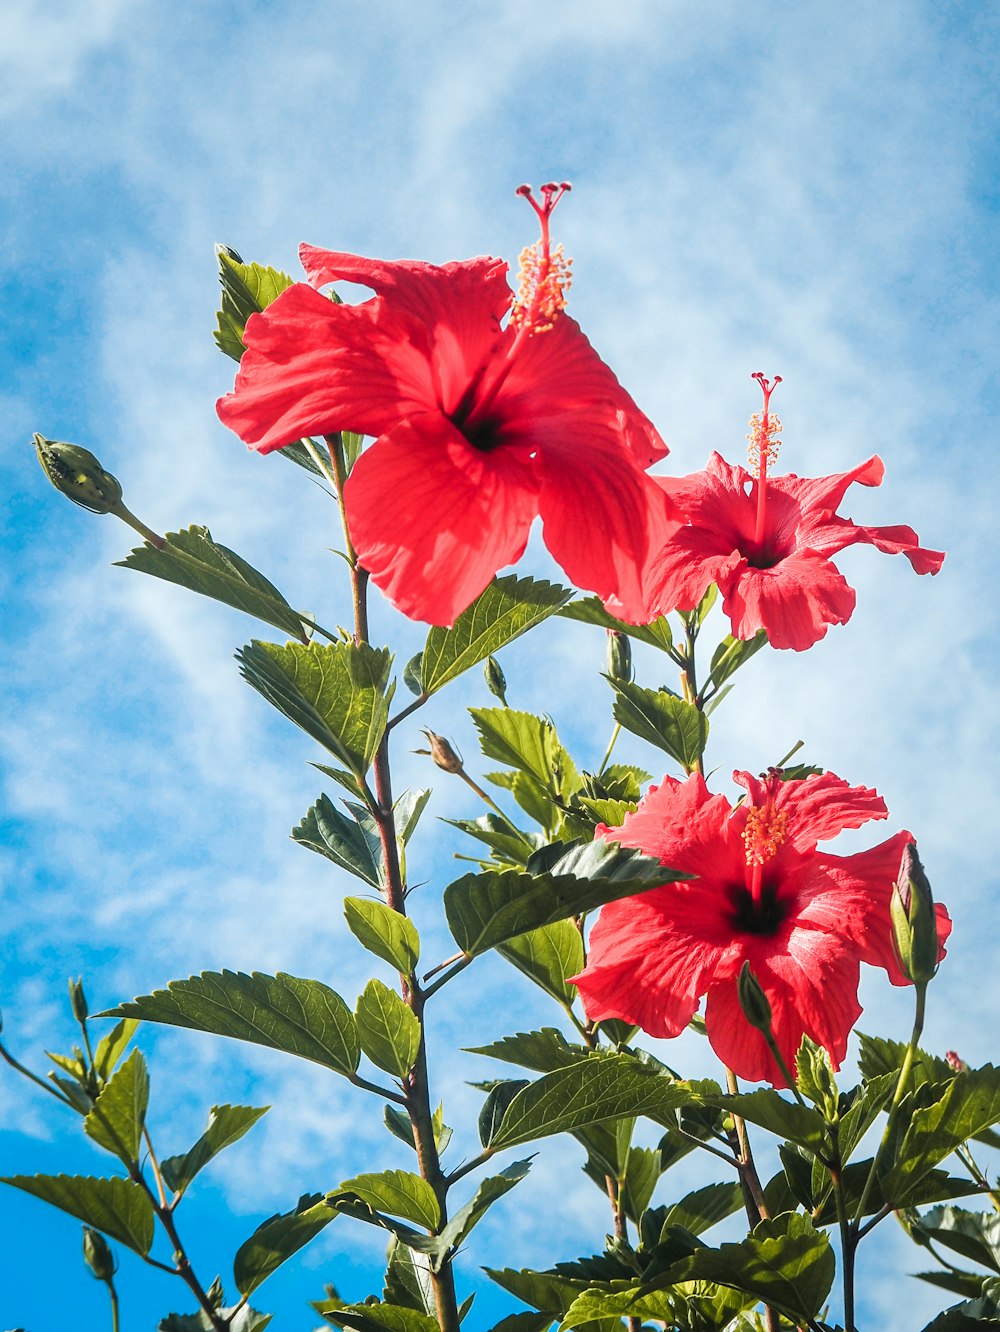 two red flowers with green leaves against a blue sky